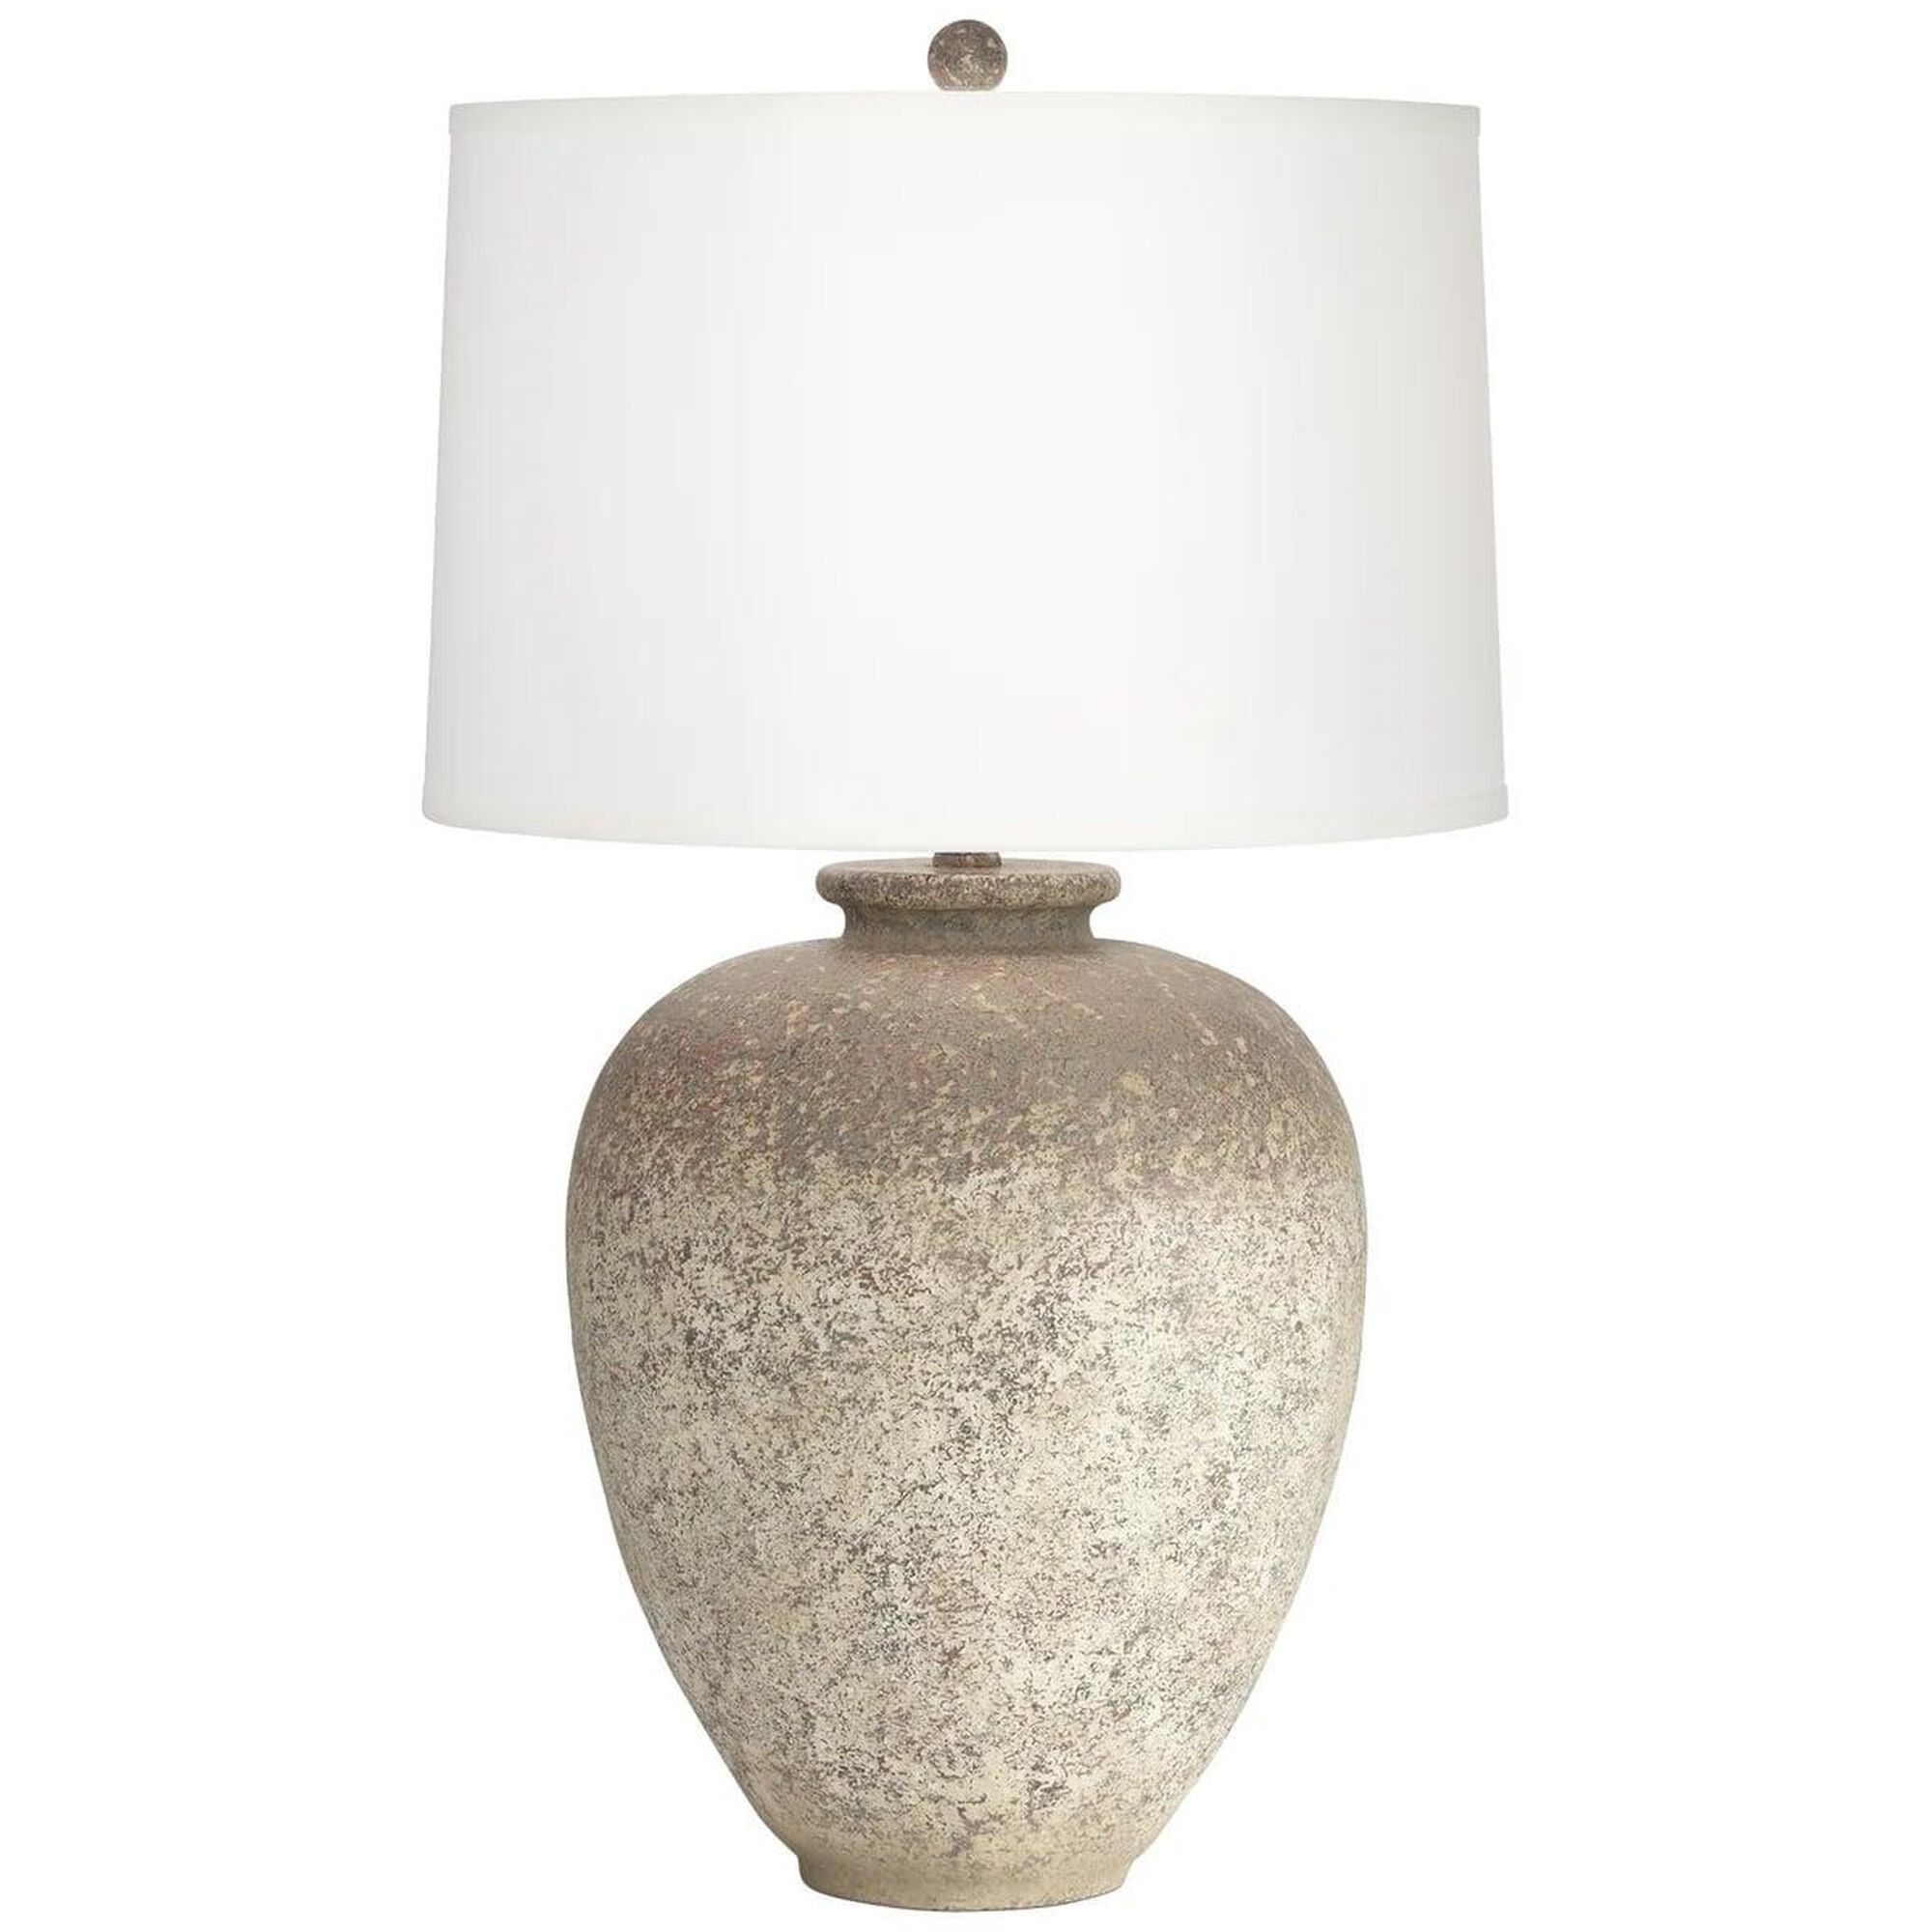 Eloy 29 Inch Table Lamp by Pacific Coast Lighting | 1800 Lighting